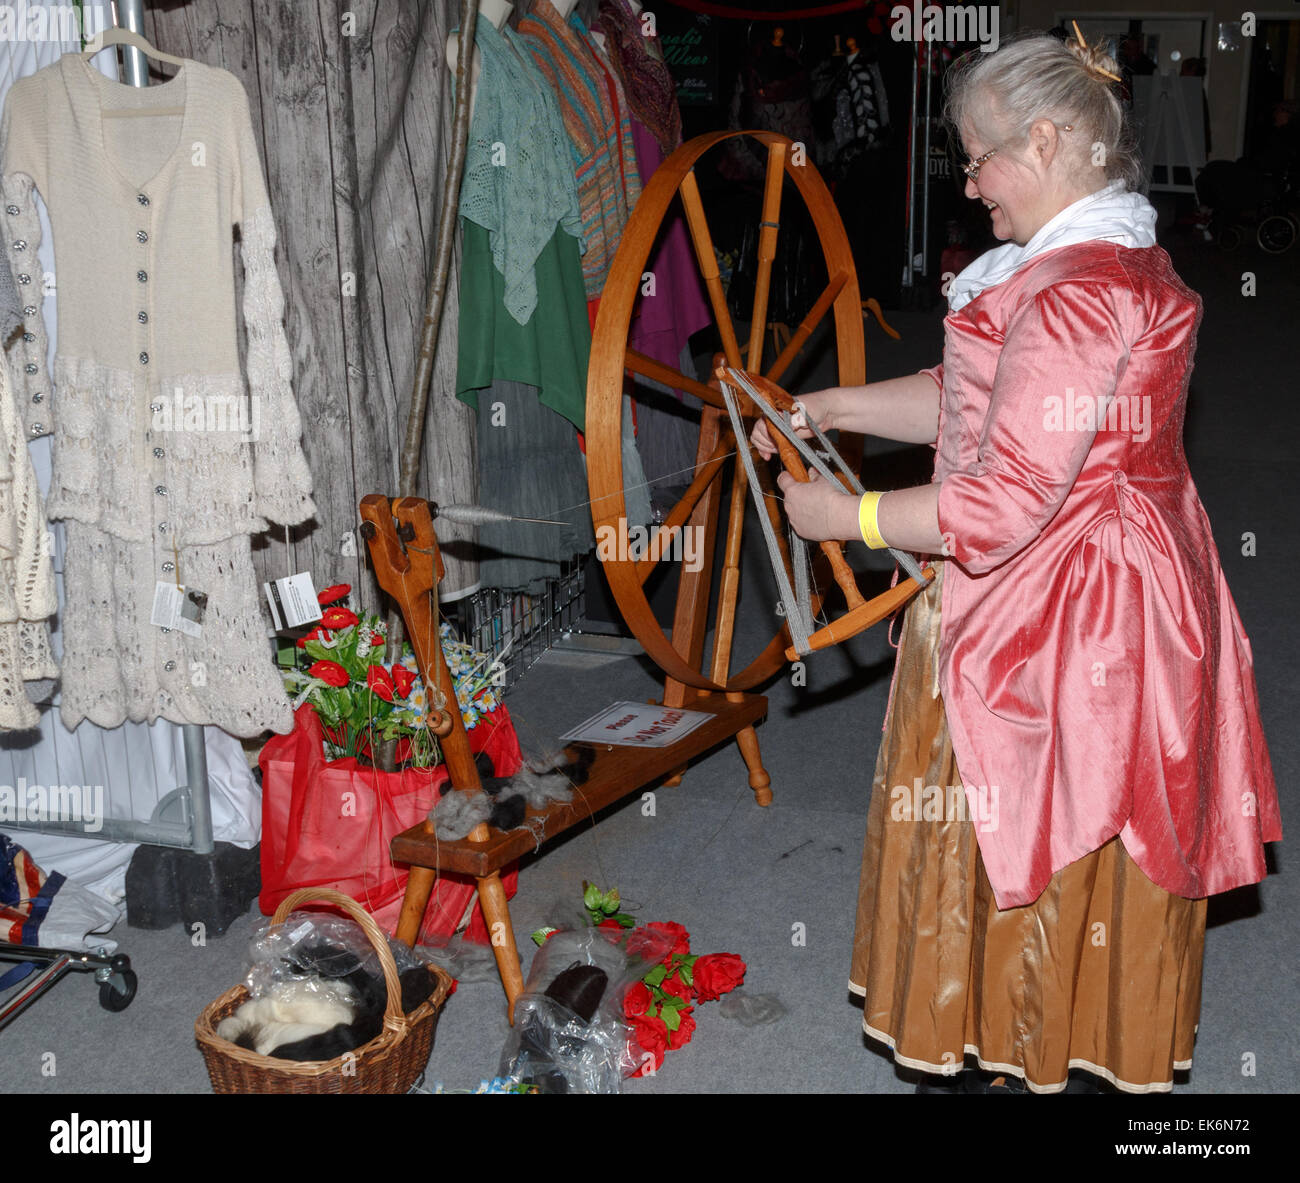 Woman (50-60 years) spinner in traditional costume using a hand driven spinning wheel to spin alpaca yarn Stock Photo